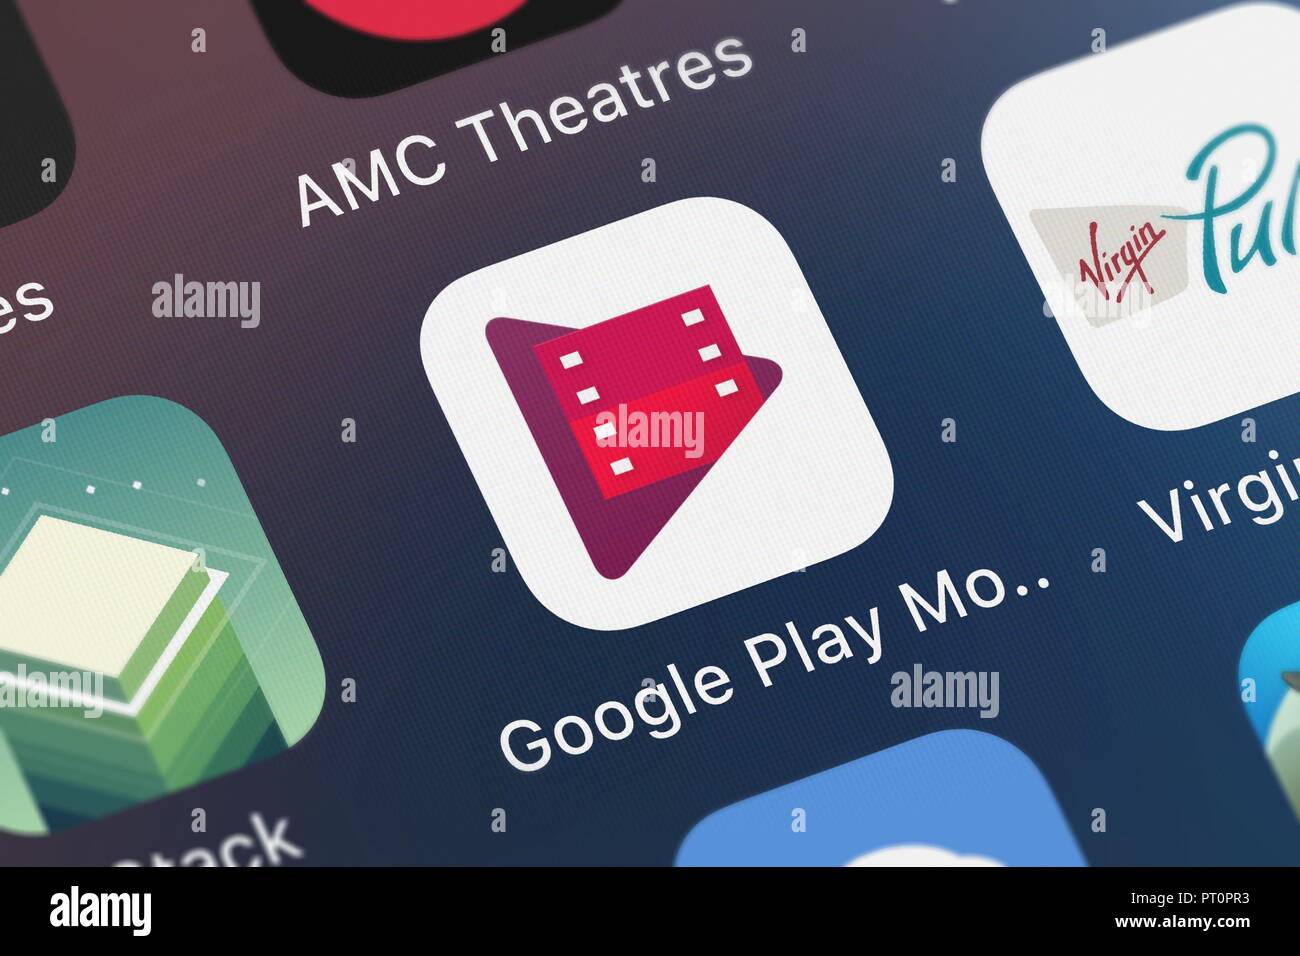 London United Kingdom October 05 18 Icon Of The Mobile App Google Play Movies Tv From Google Inc On An Iphone Stock Photo Alamy